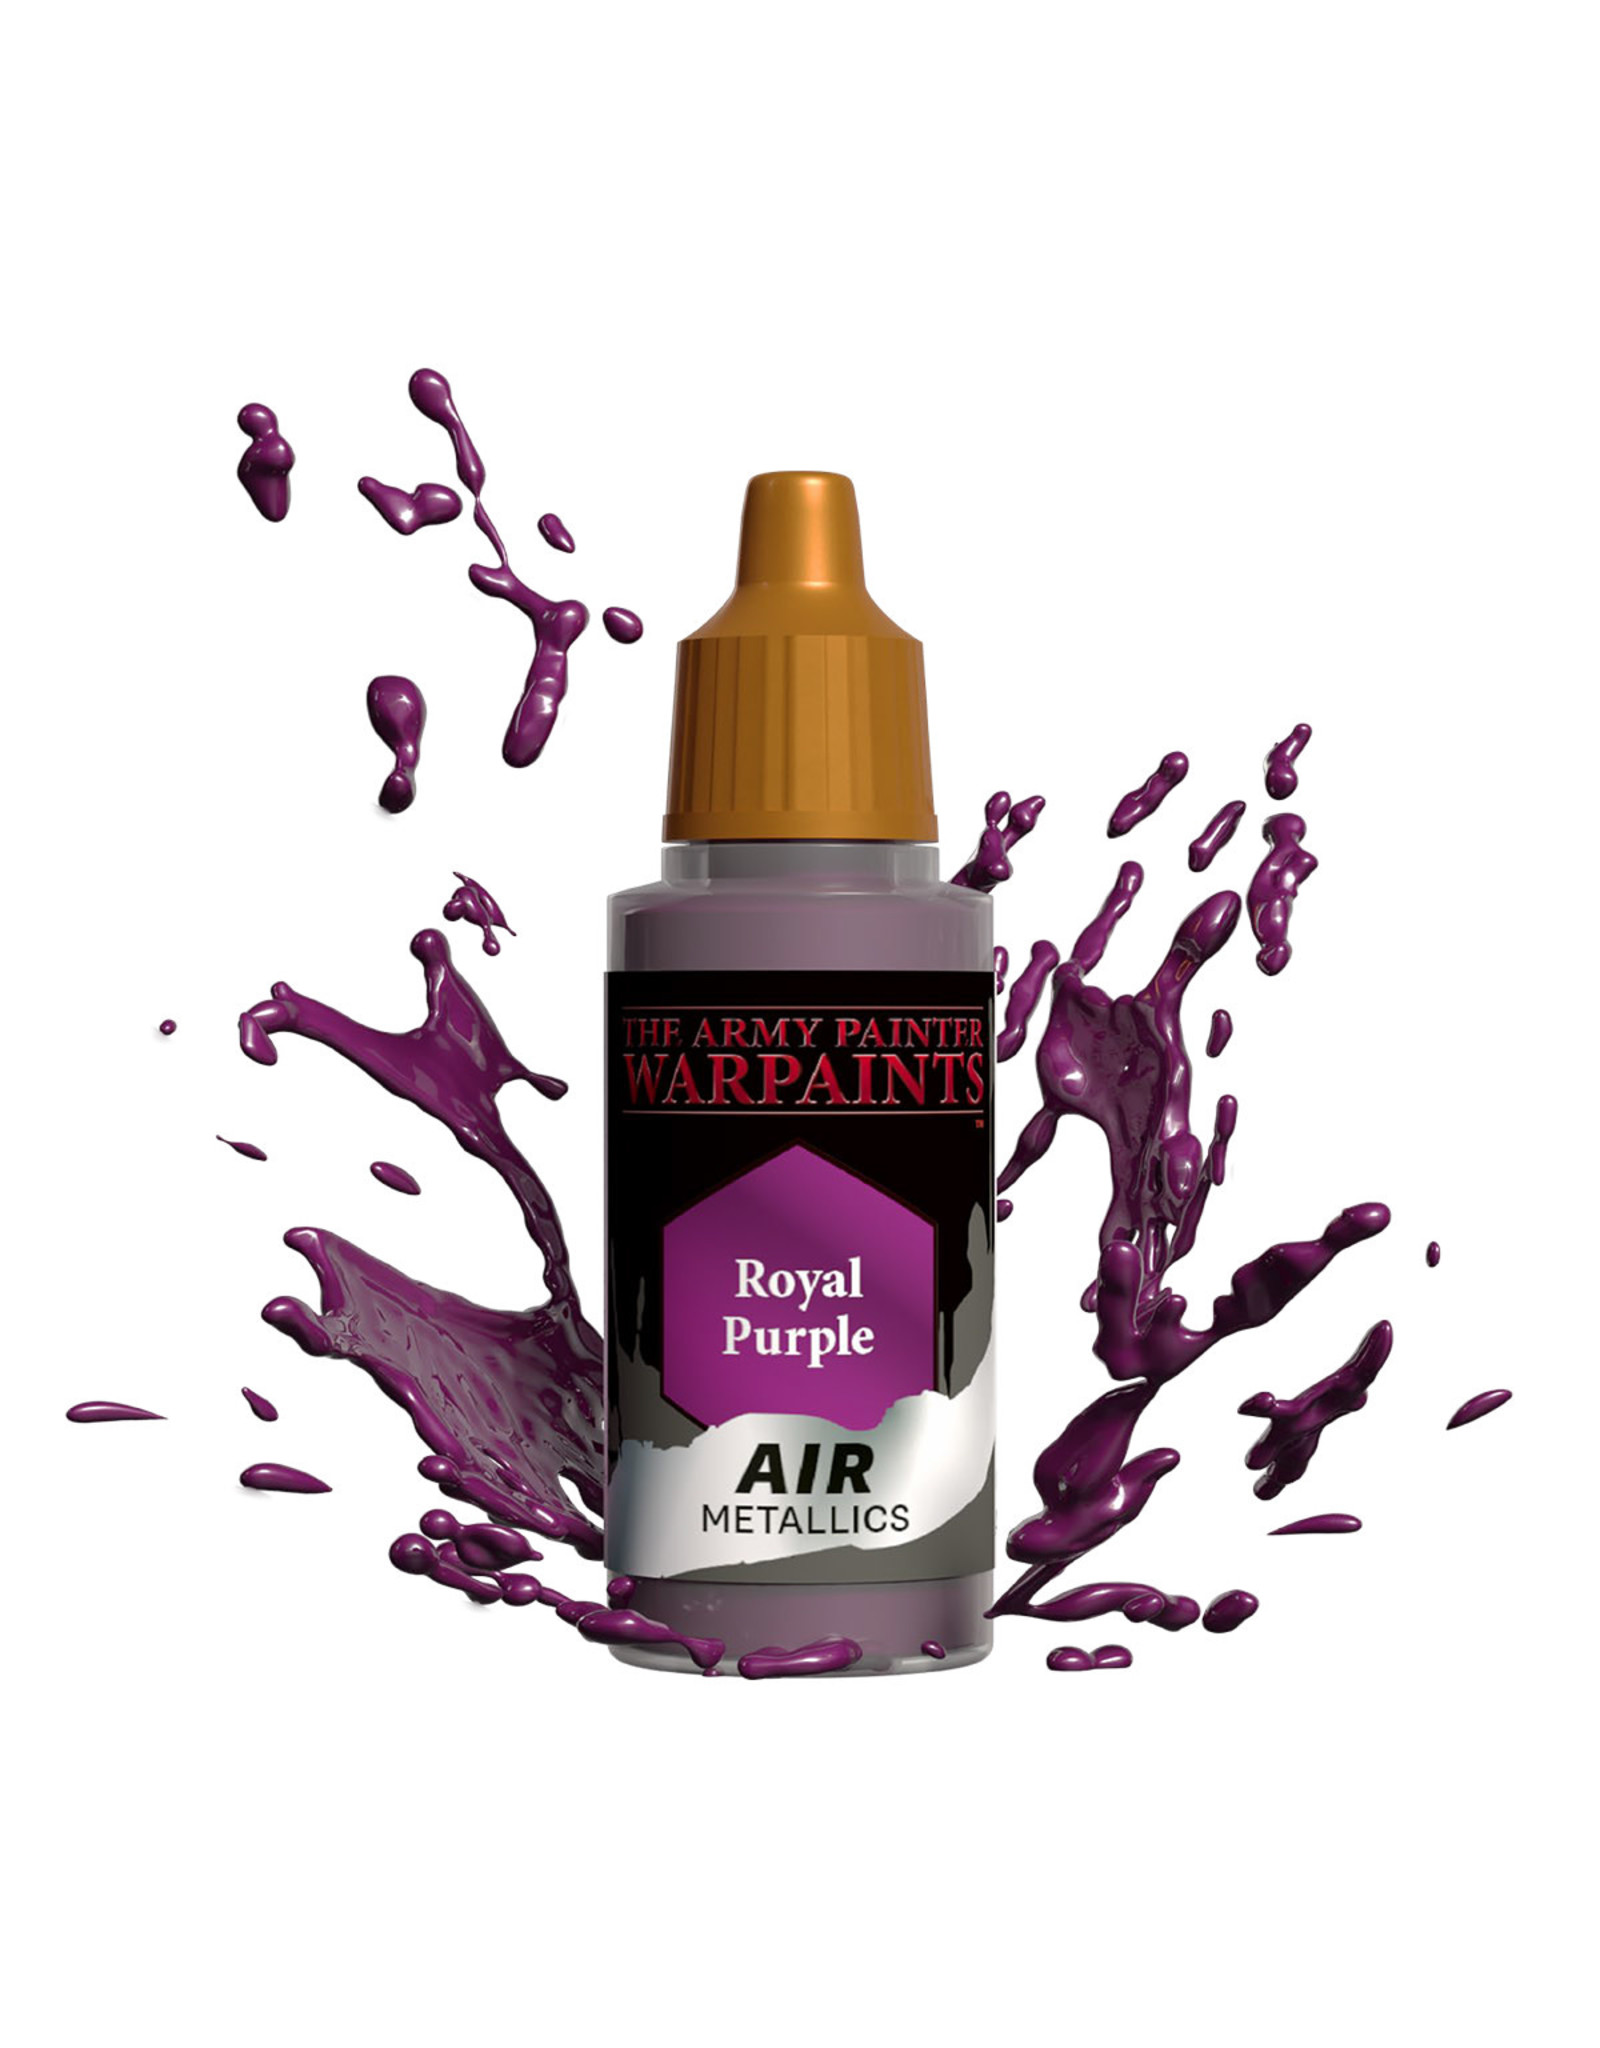 The Army Painter The Army Painter Warpaints Air Metallics: Royal Purple